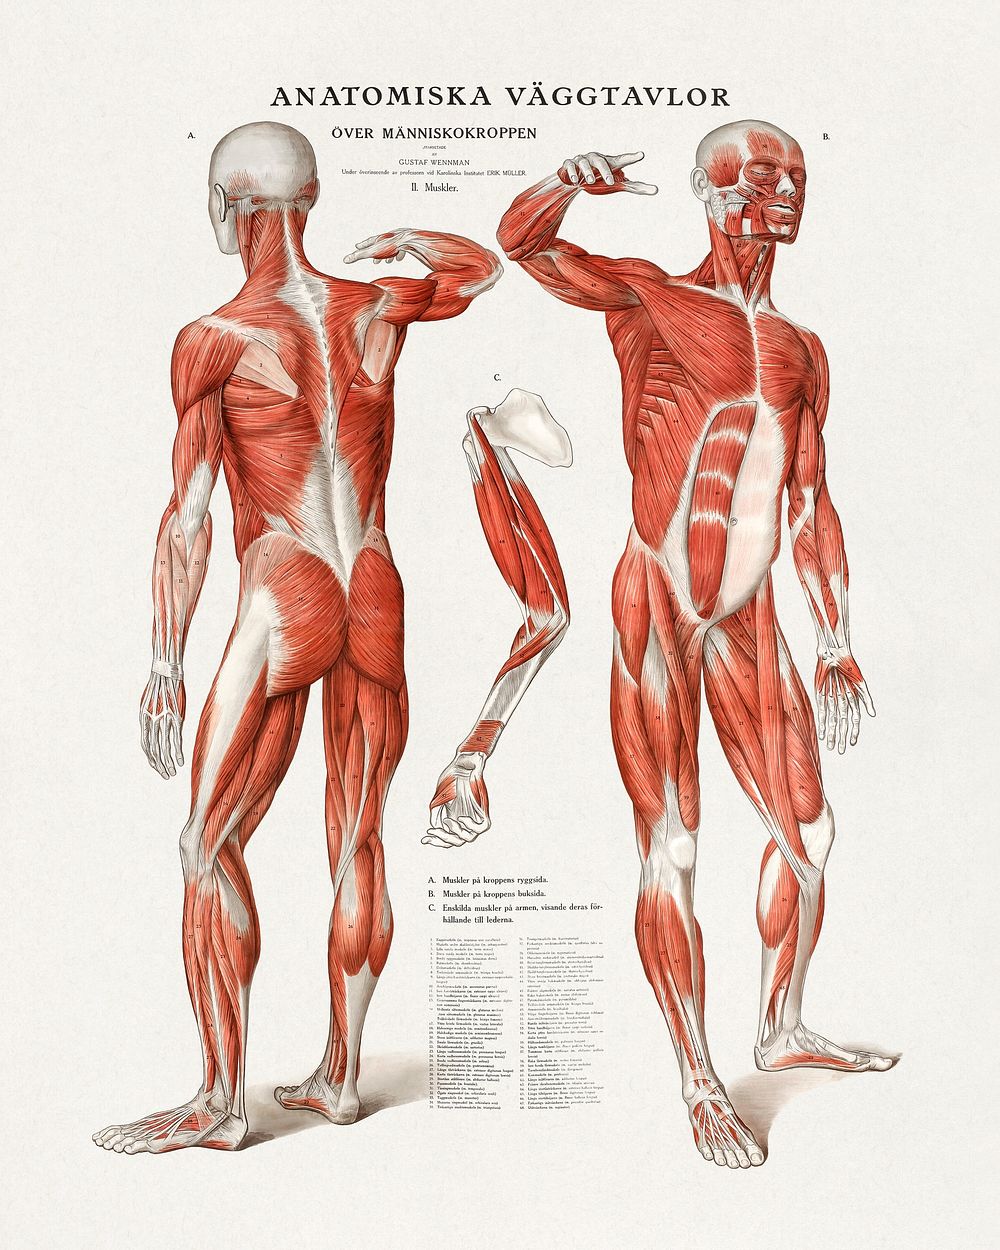 Anatomical poster (1920) chromolithograph art by Gustaf Wennman. Original public domain image from Wikimedia Commons.…